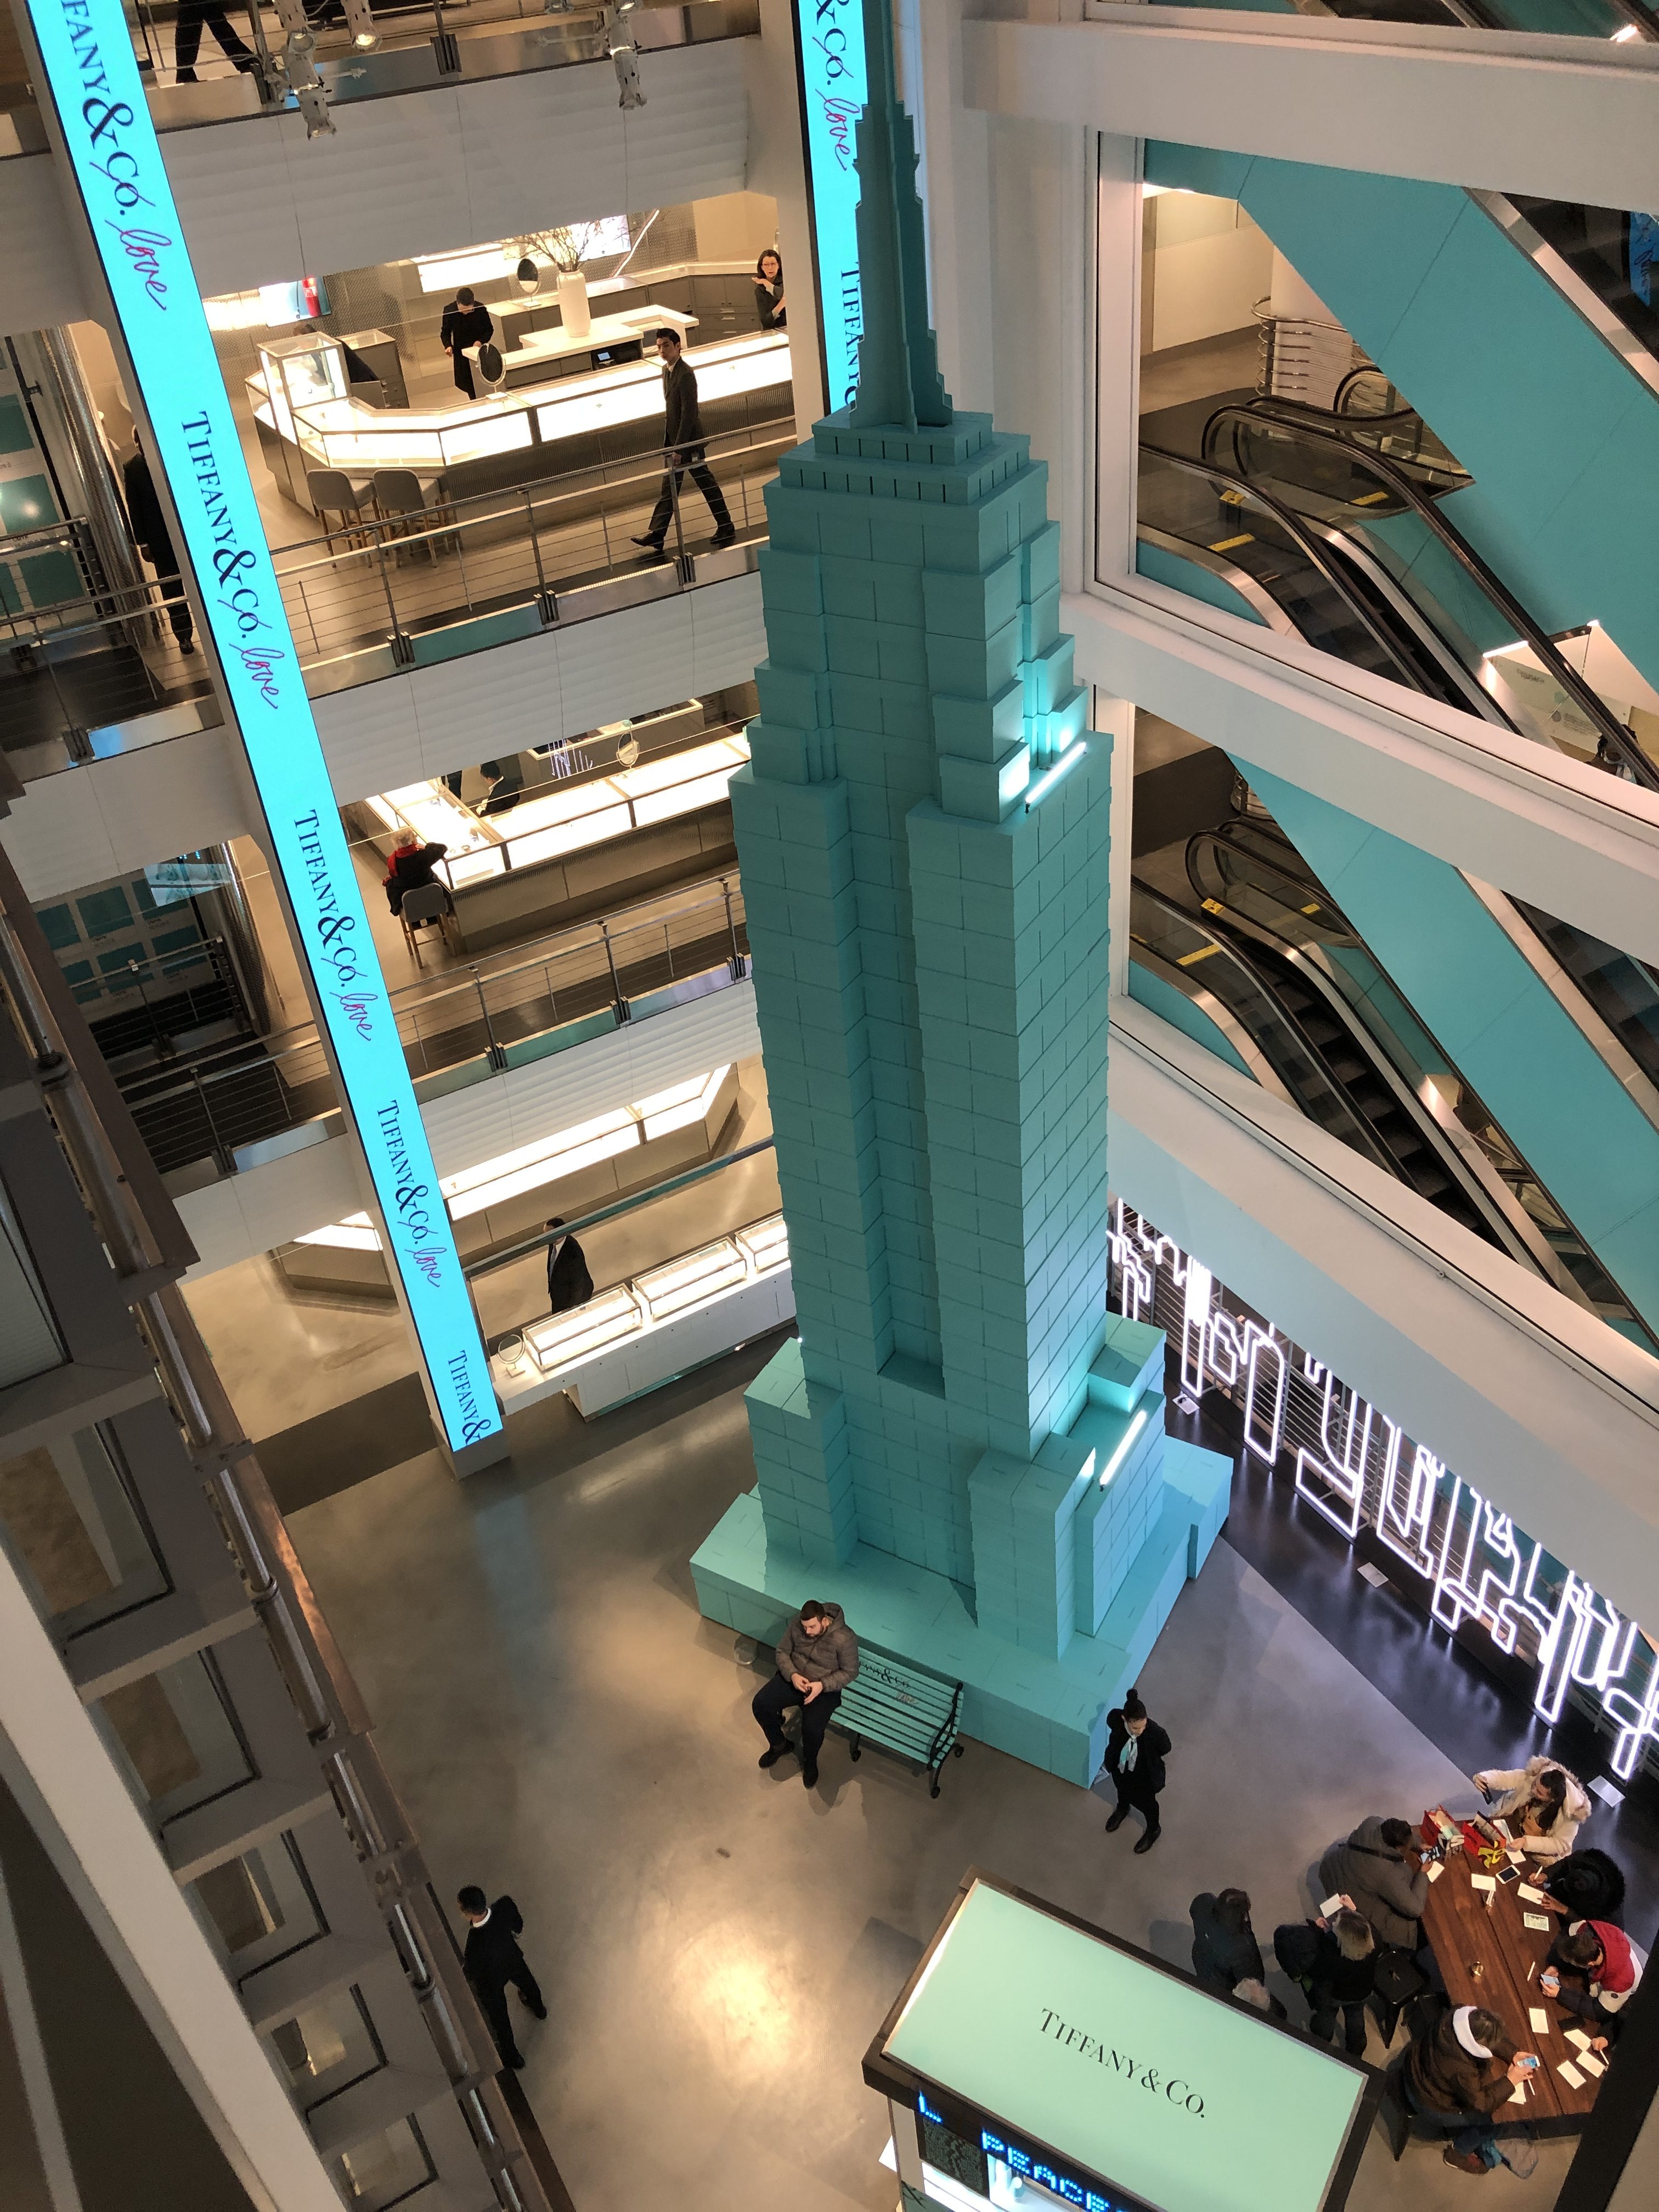 Tiffany & Co. moves into a temporary location next door to iconic